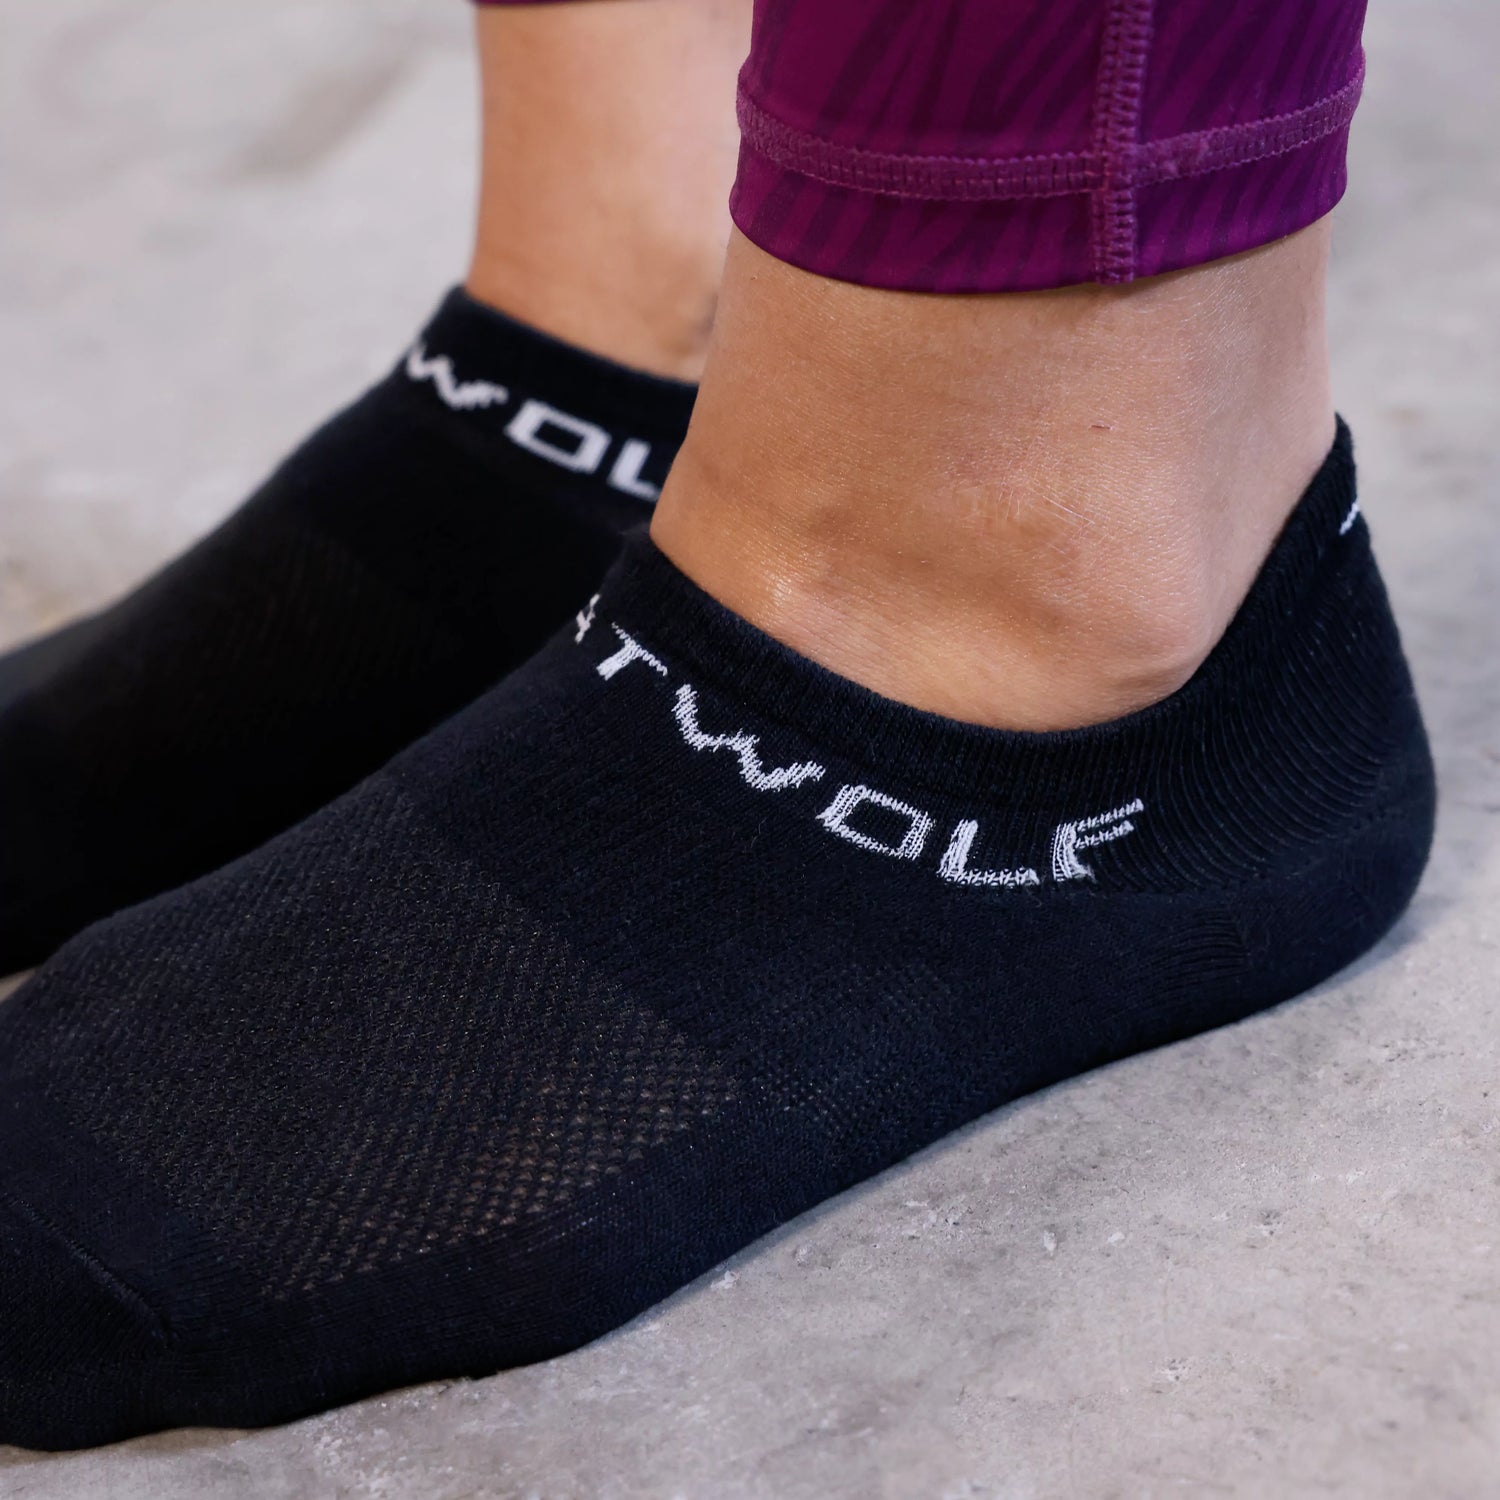 squatwolf-gym-wear-pack-of-3-trainer-socks-onyx-workout